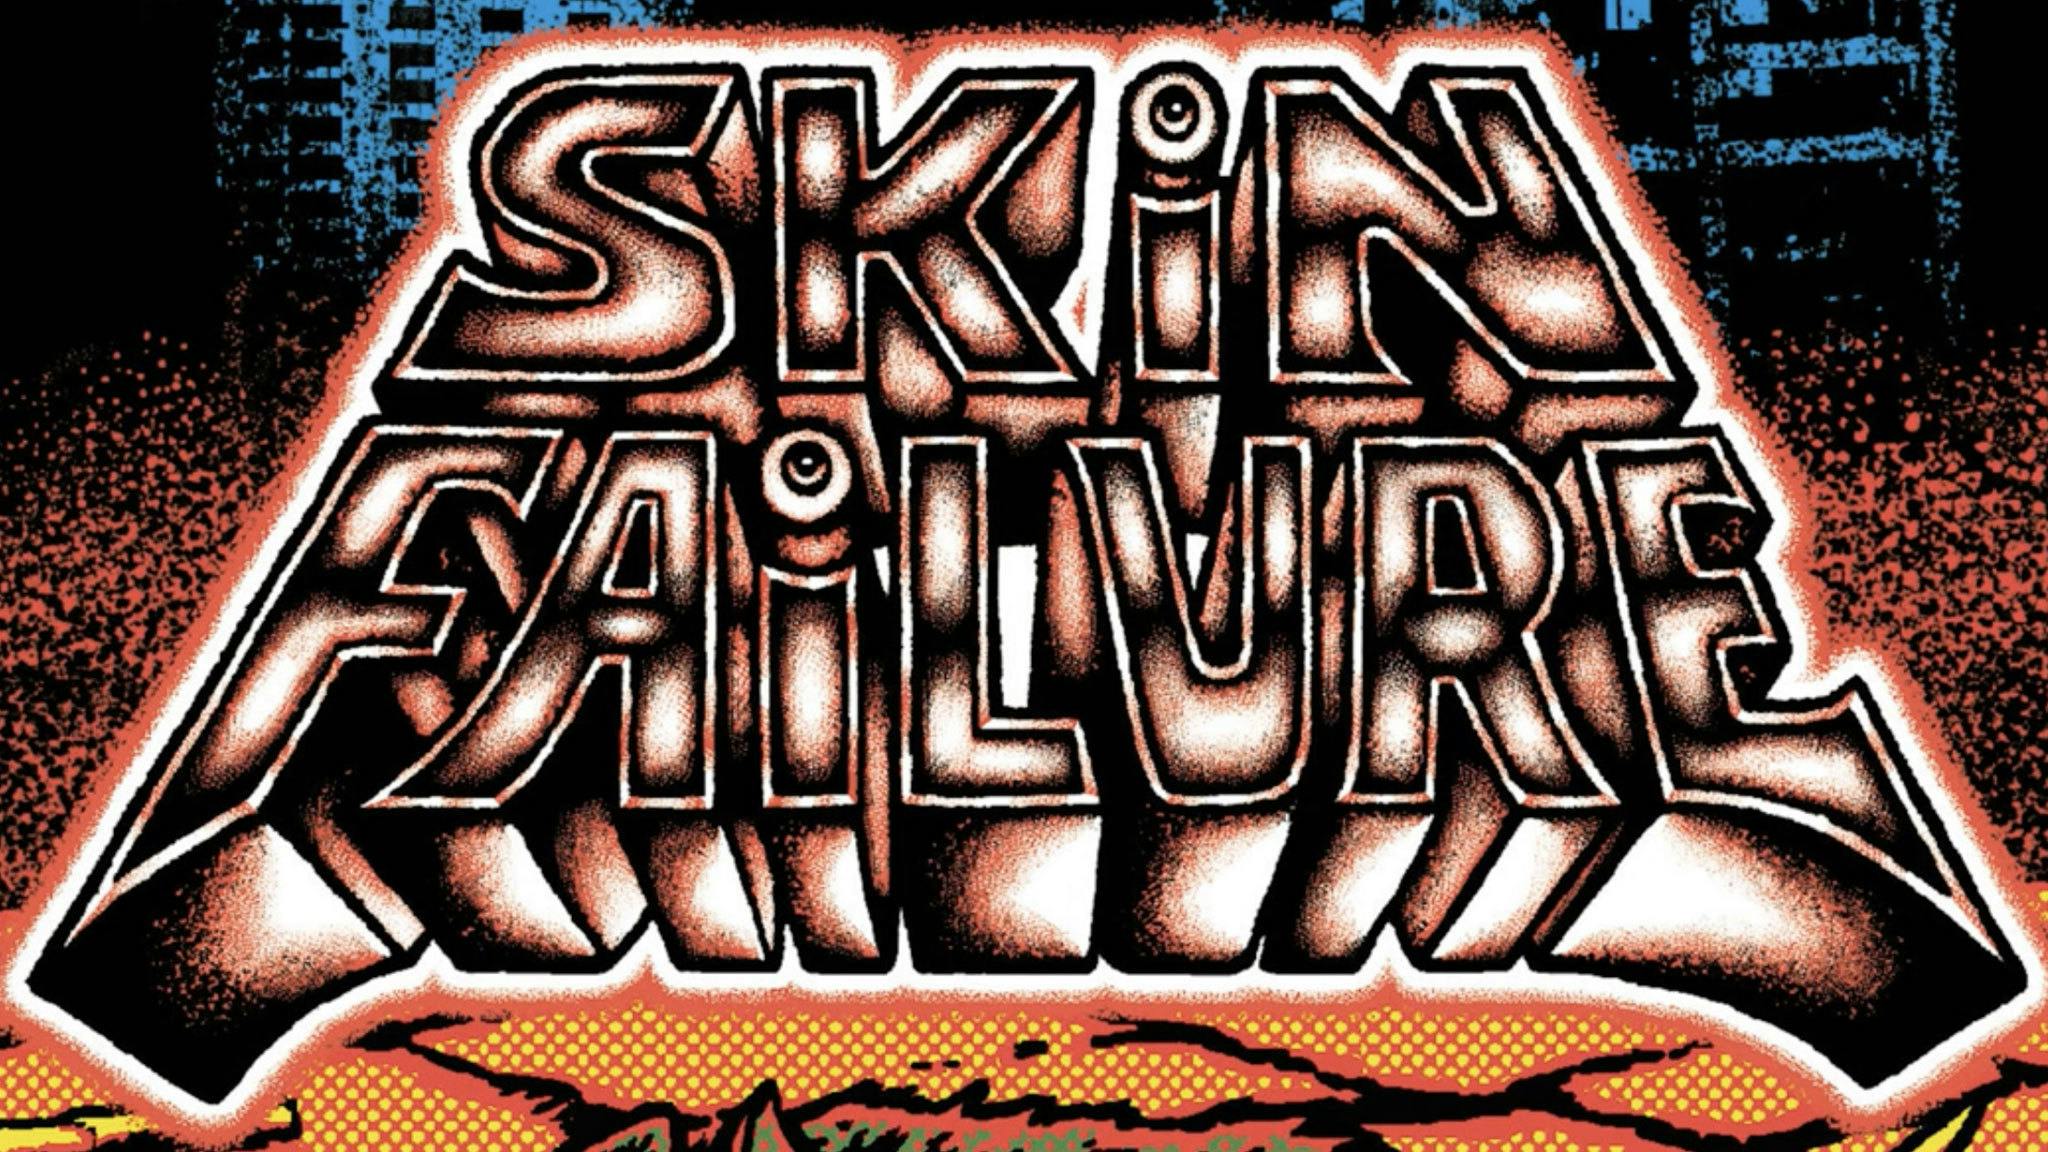 Ex-Black Peaks members announce debut album with new band Skin Failure